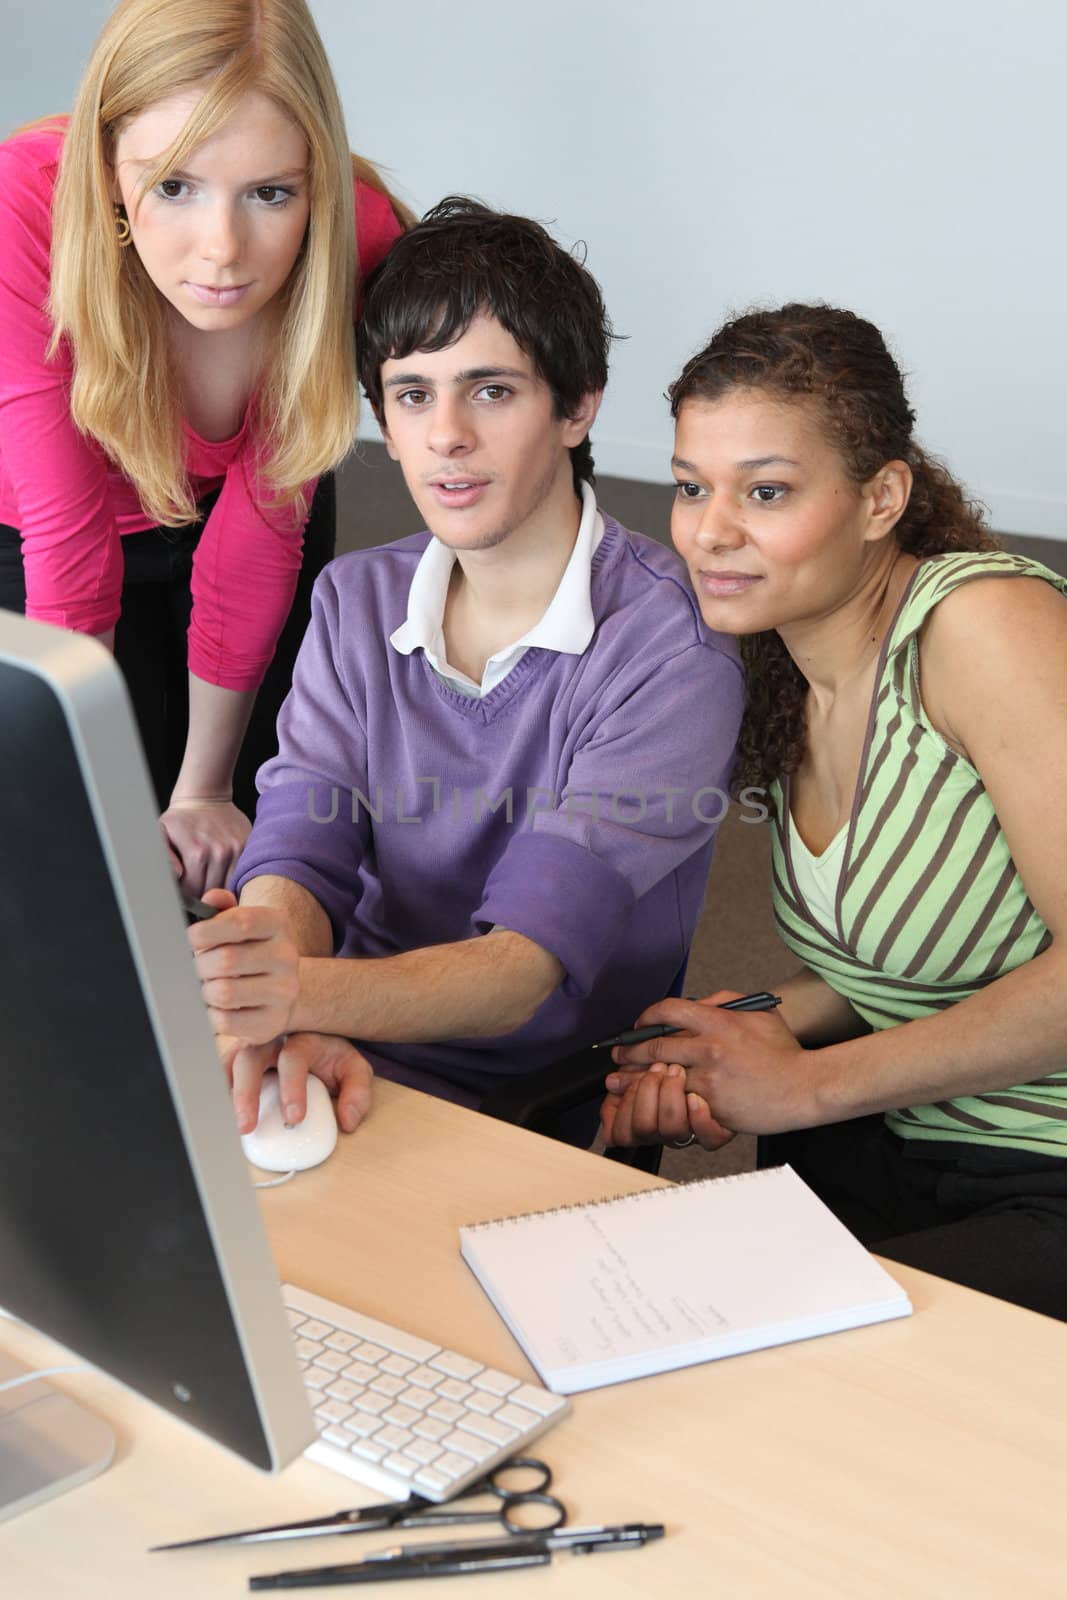 Teenagers looking at a computer screen by phovoir